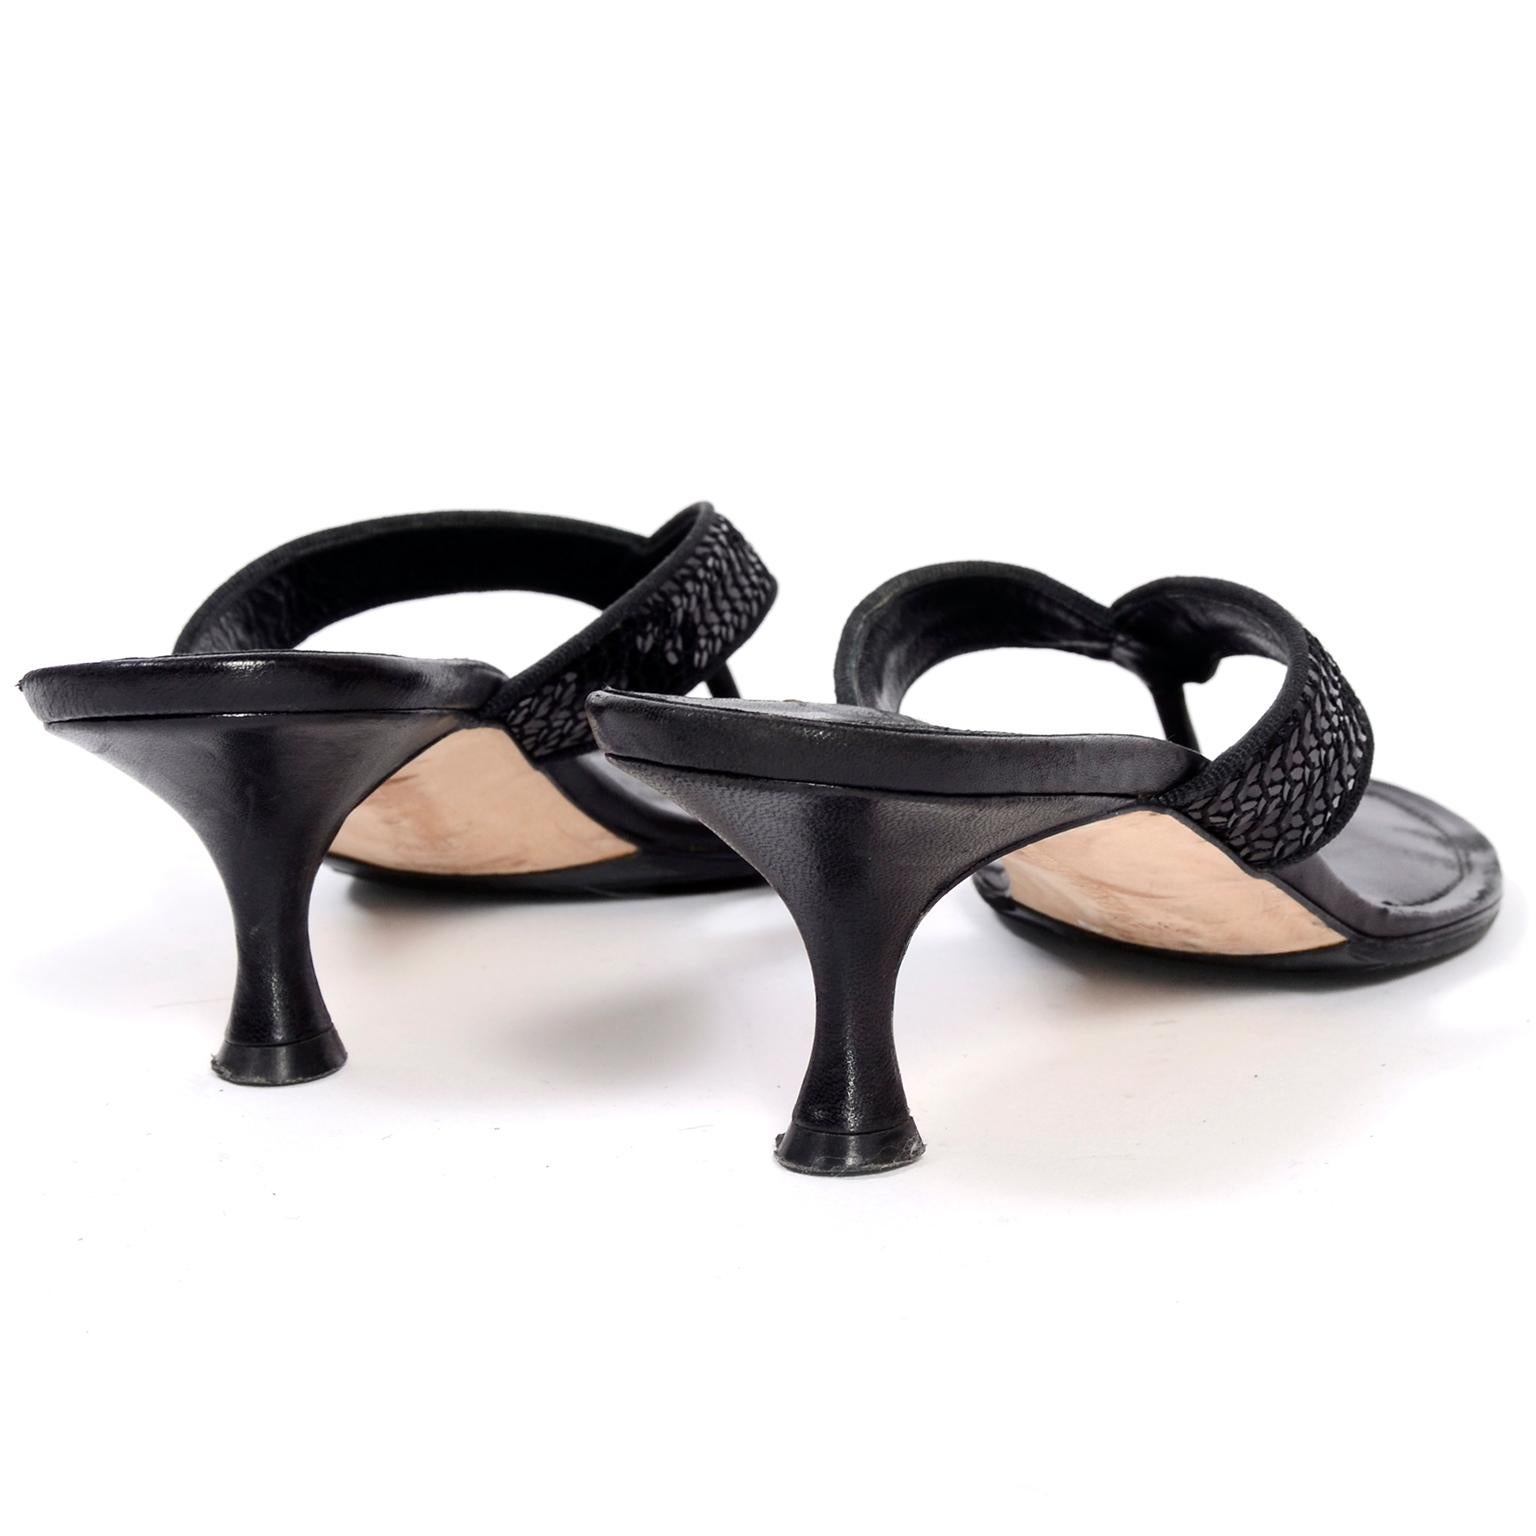 Manolo Blahnik Shoes Black Leather Thong Sandals With Sequins & Heels 38.5 1